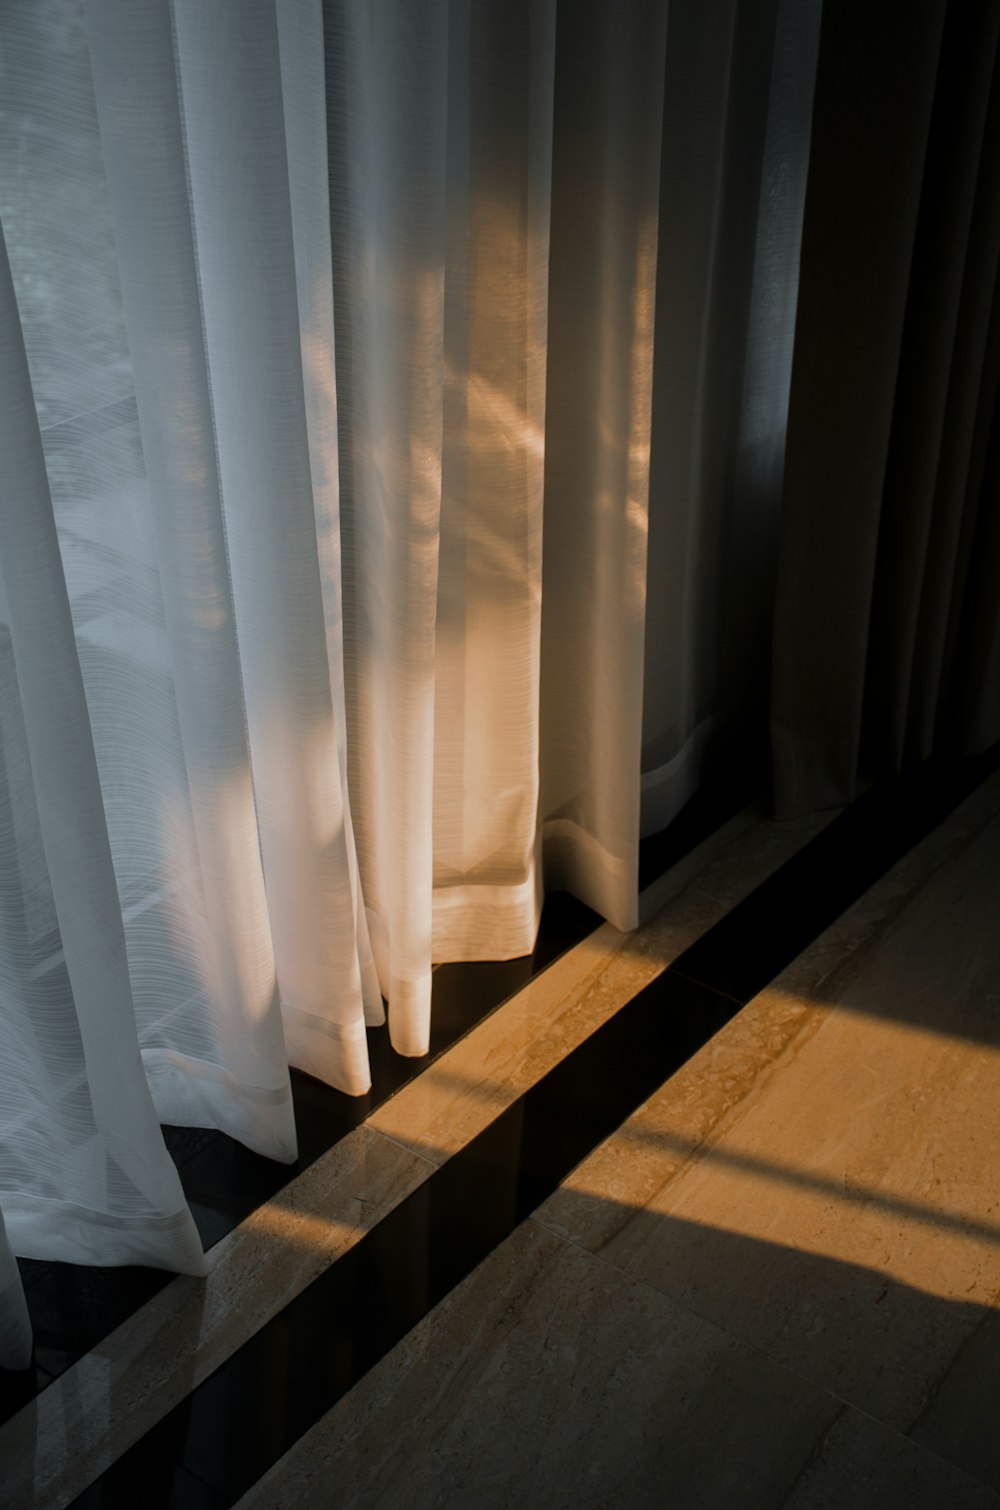 the shadow of a curtain is cast on the floor